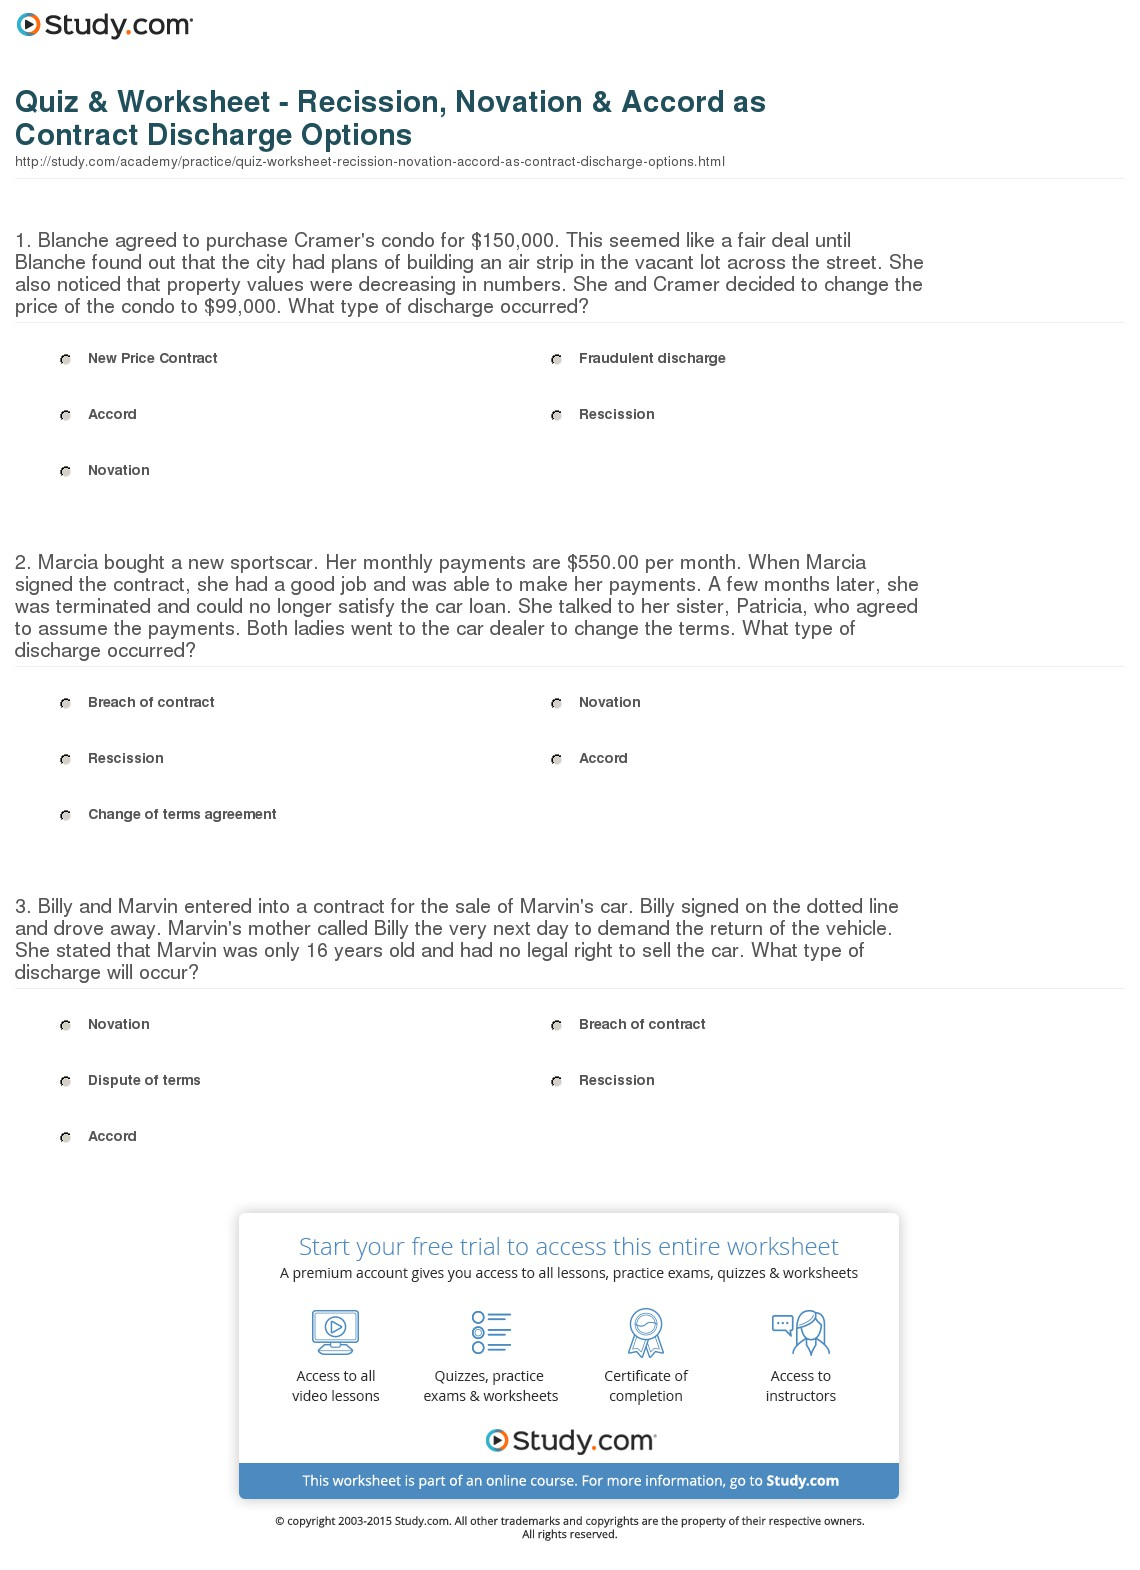 Loan Novation Agreement Quiz Worksheet Recission Novation Accord As Contract